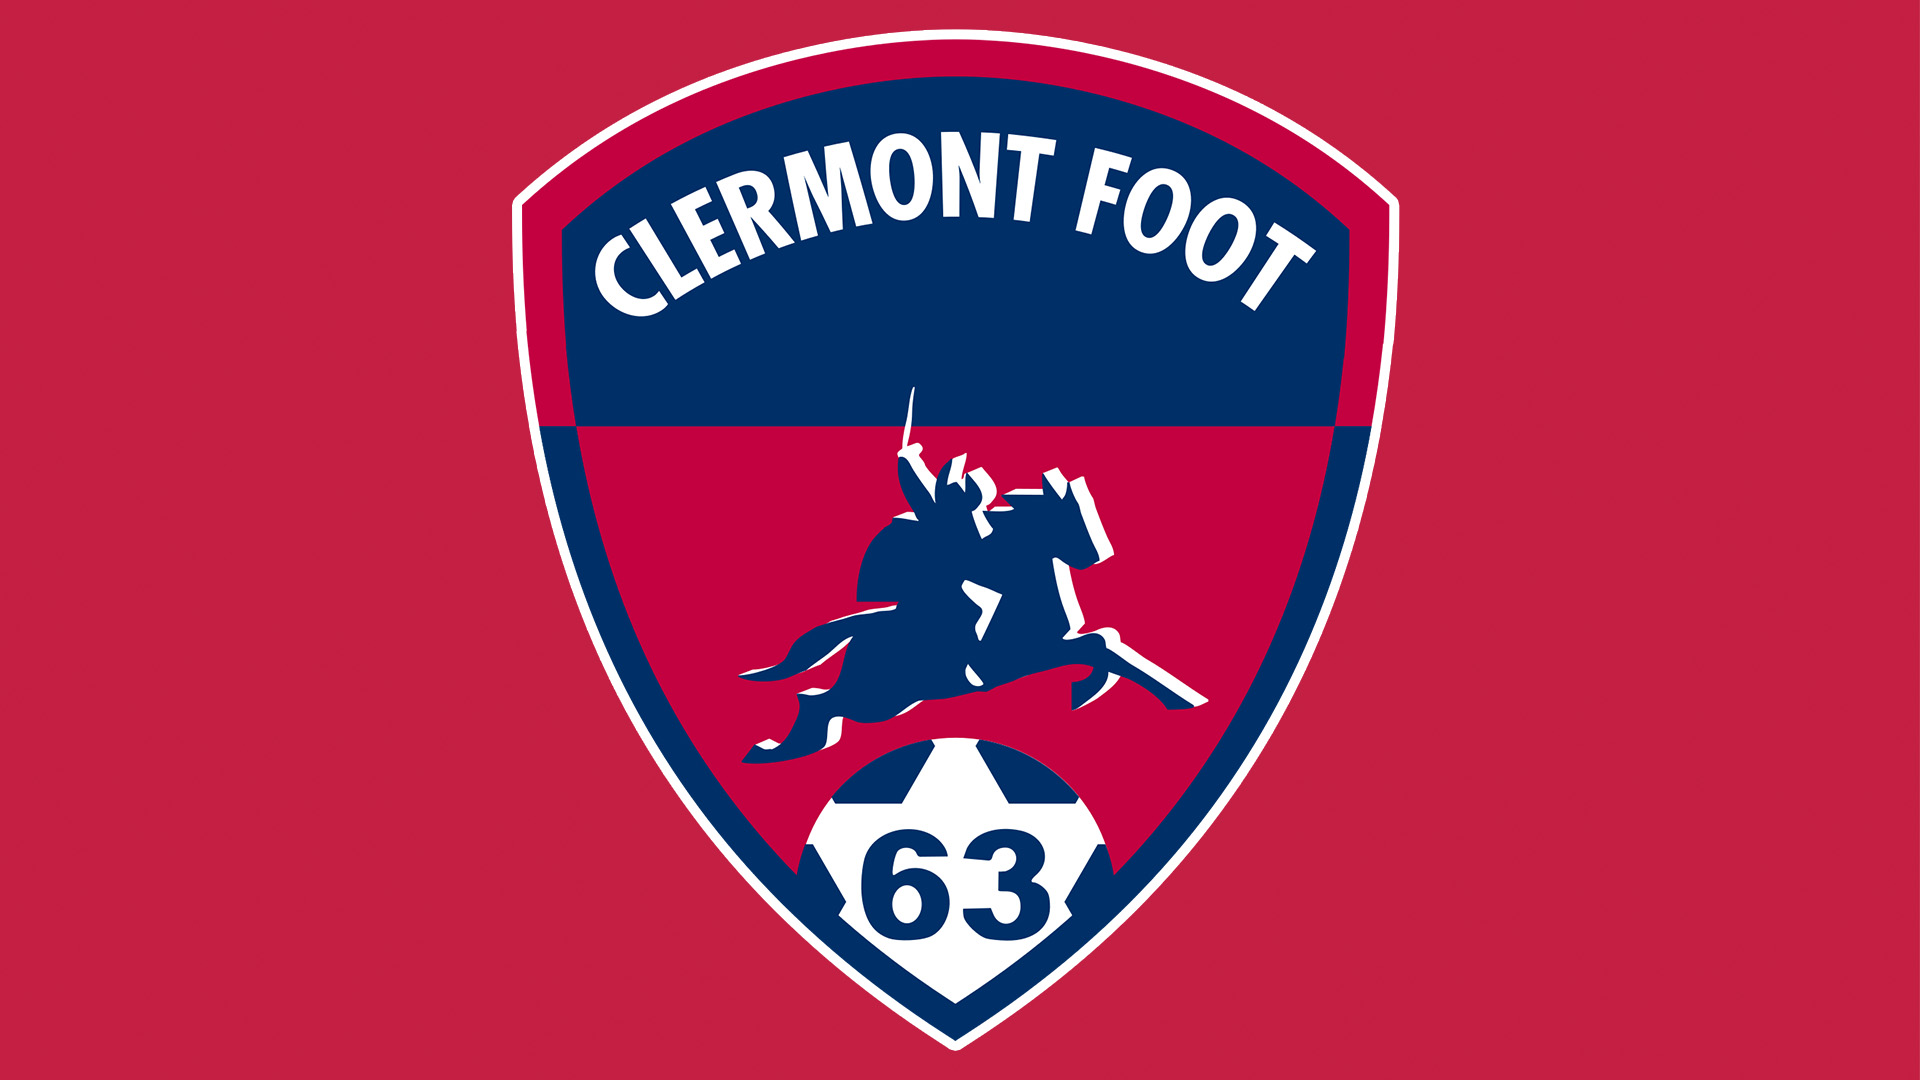 Clermont Foot 63 vs FC Annecy